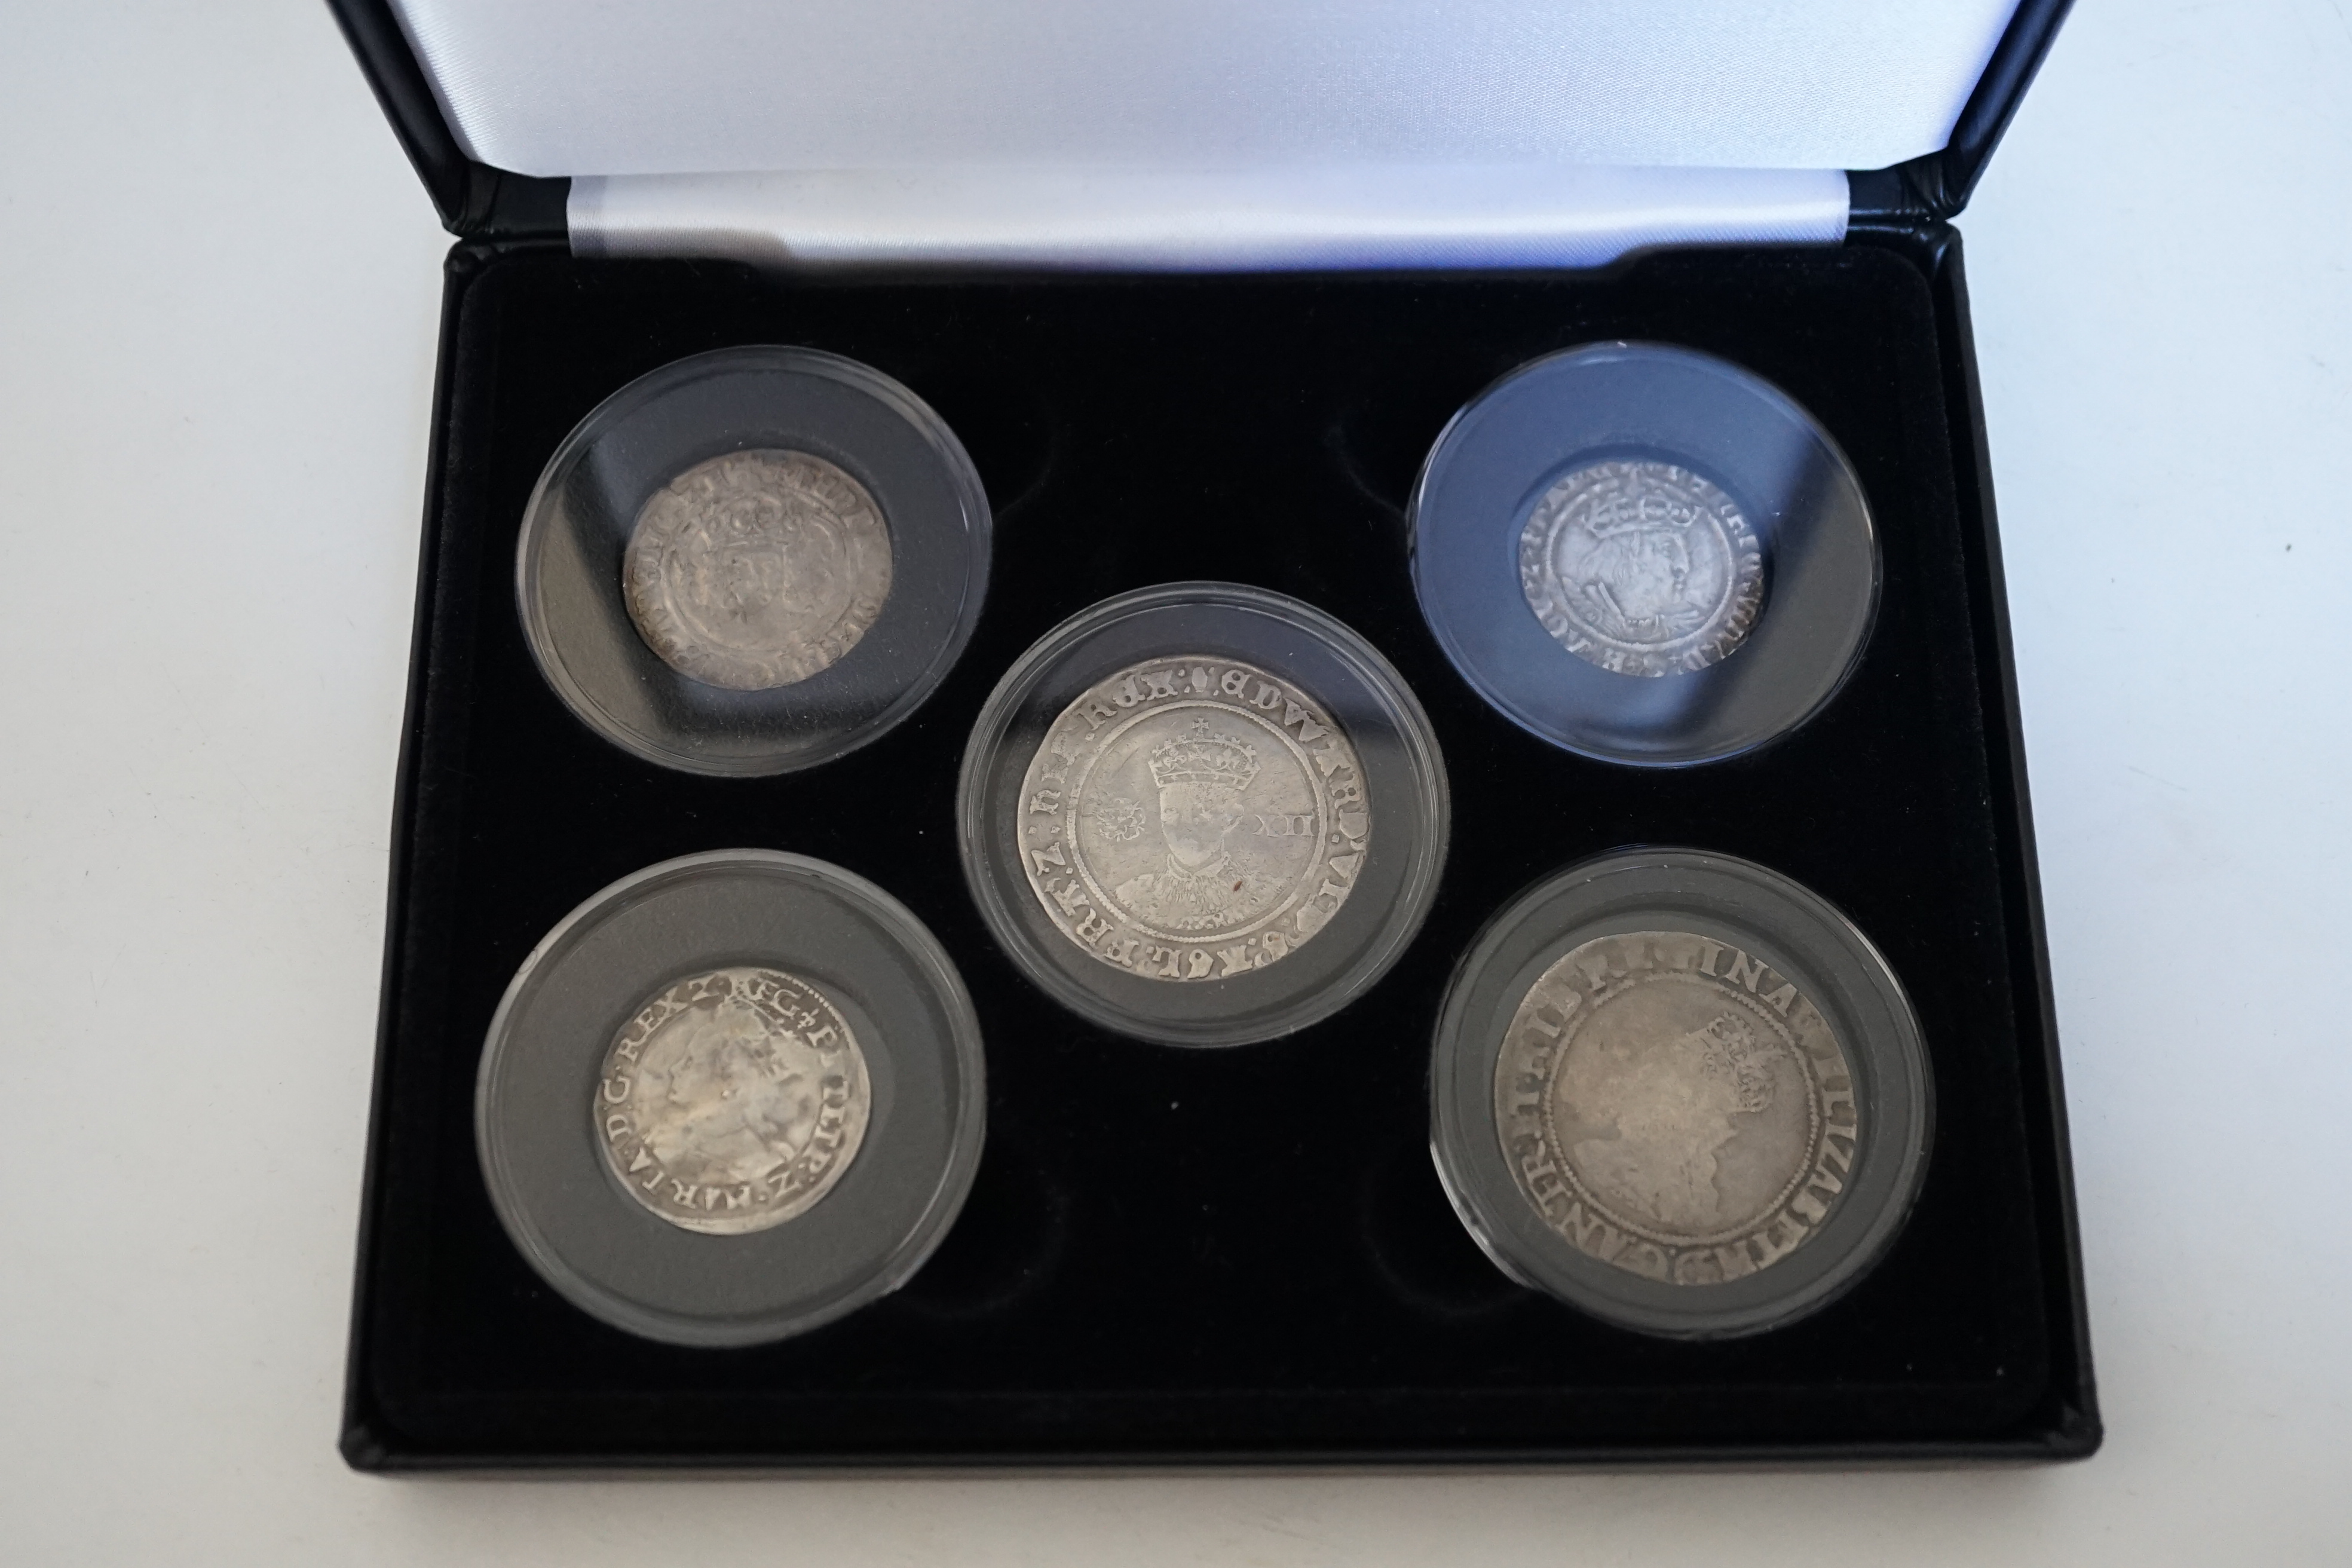 British ‘Tudor dynasty’ hammered silver coin collection; a Henry VII silver groat, (probably S2200), mm. cross-crosslet, edge split at 10 o’clock otherwise near VF, a Henry VIII silver groat, (S2337E), mm. rose, flange o